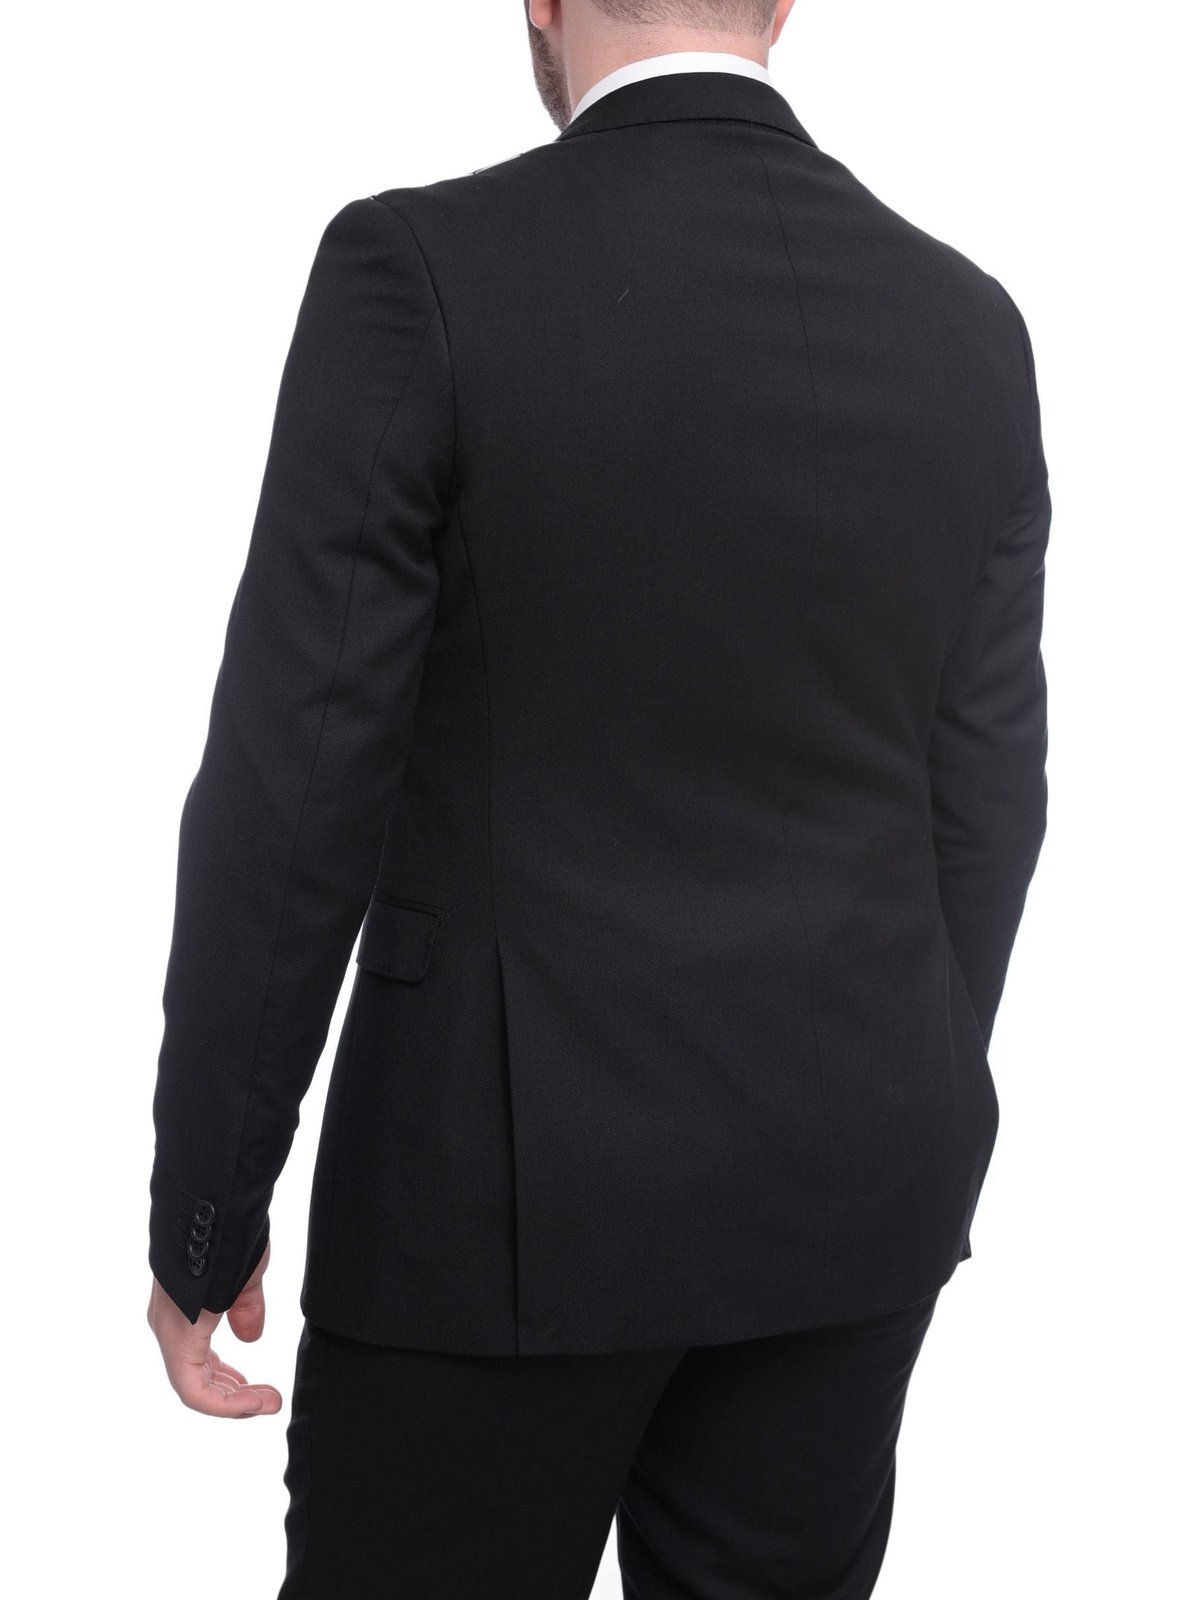 Zanetti TWO PIECE SUITS Zanetti Classic Fit Solid Black Two Button Wool Suit